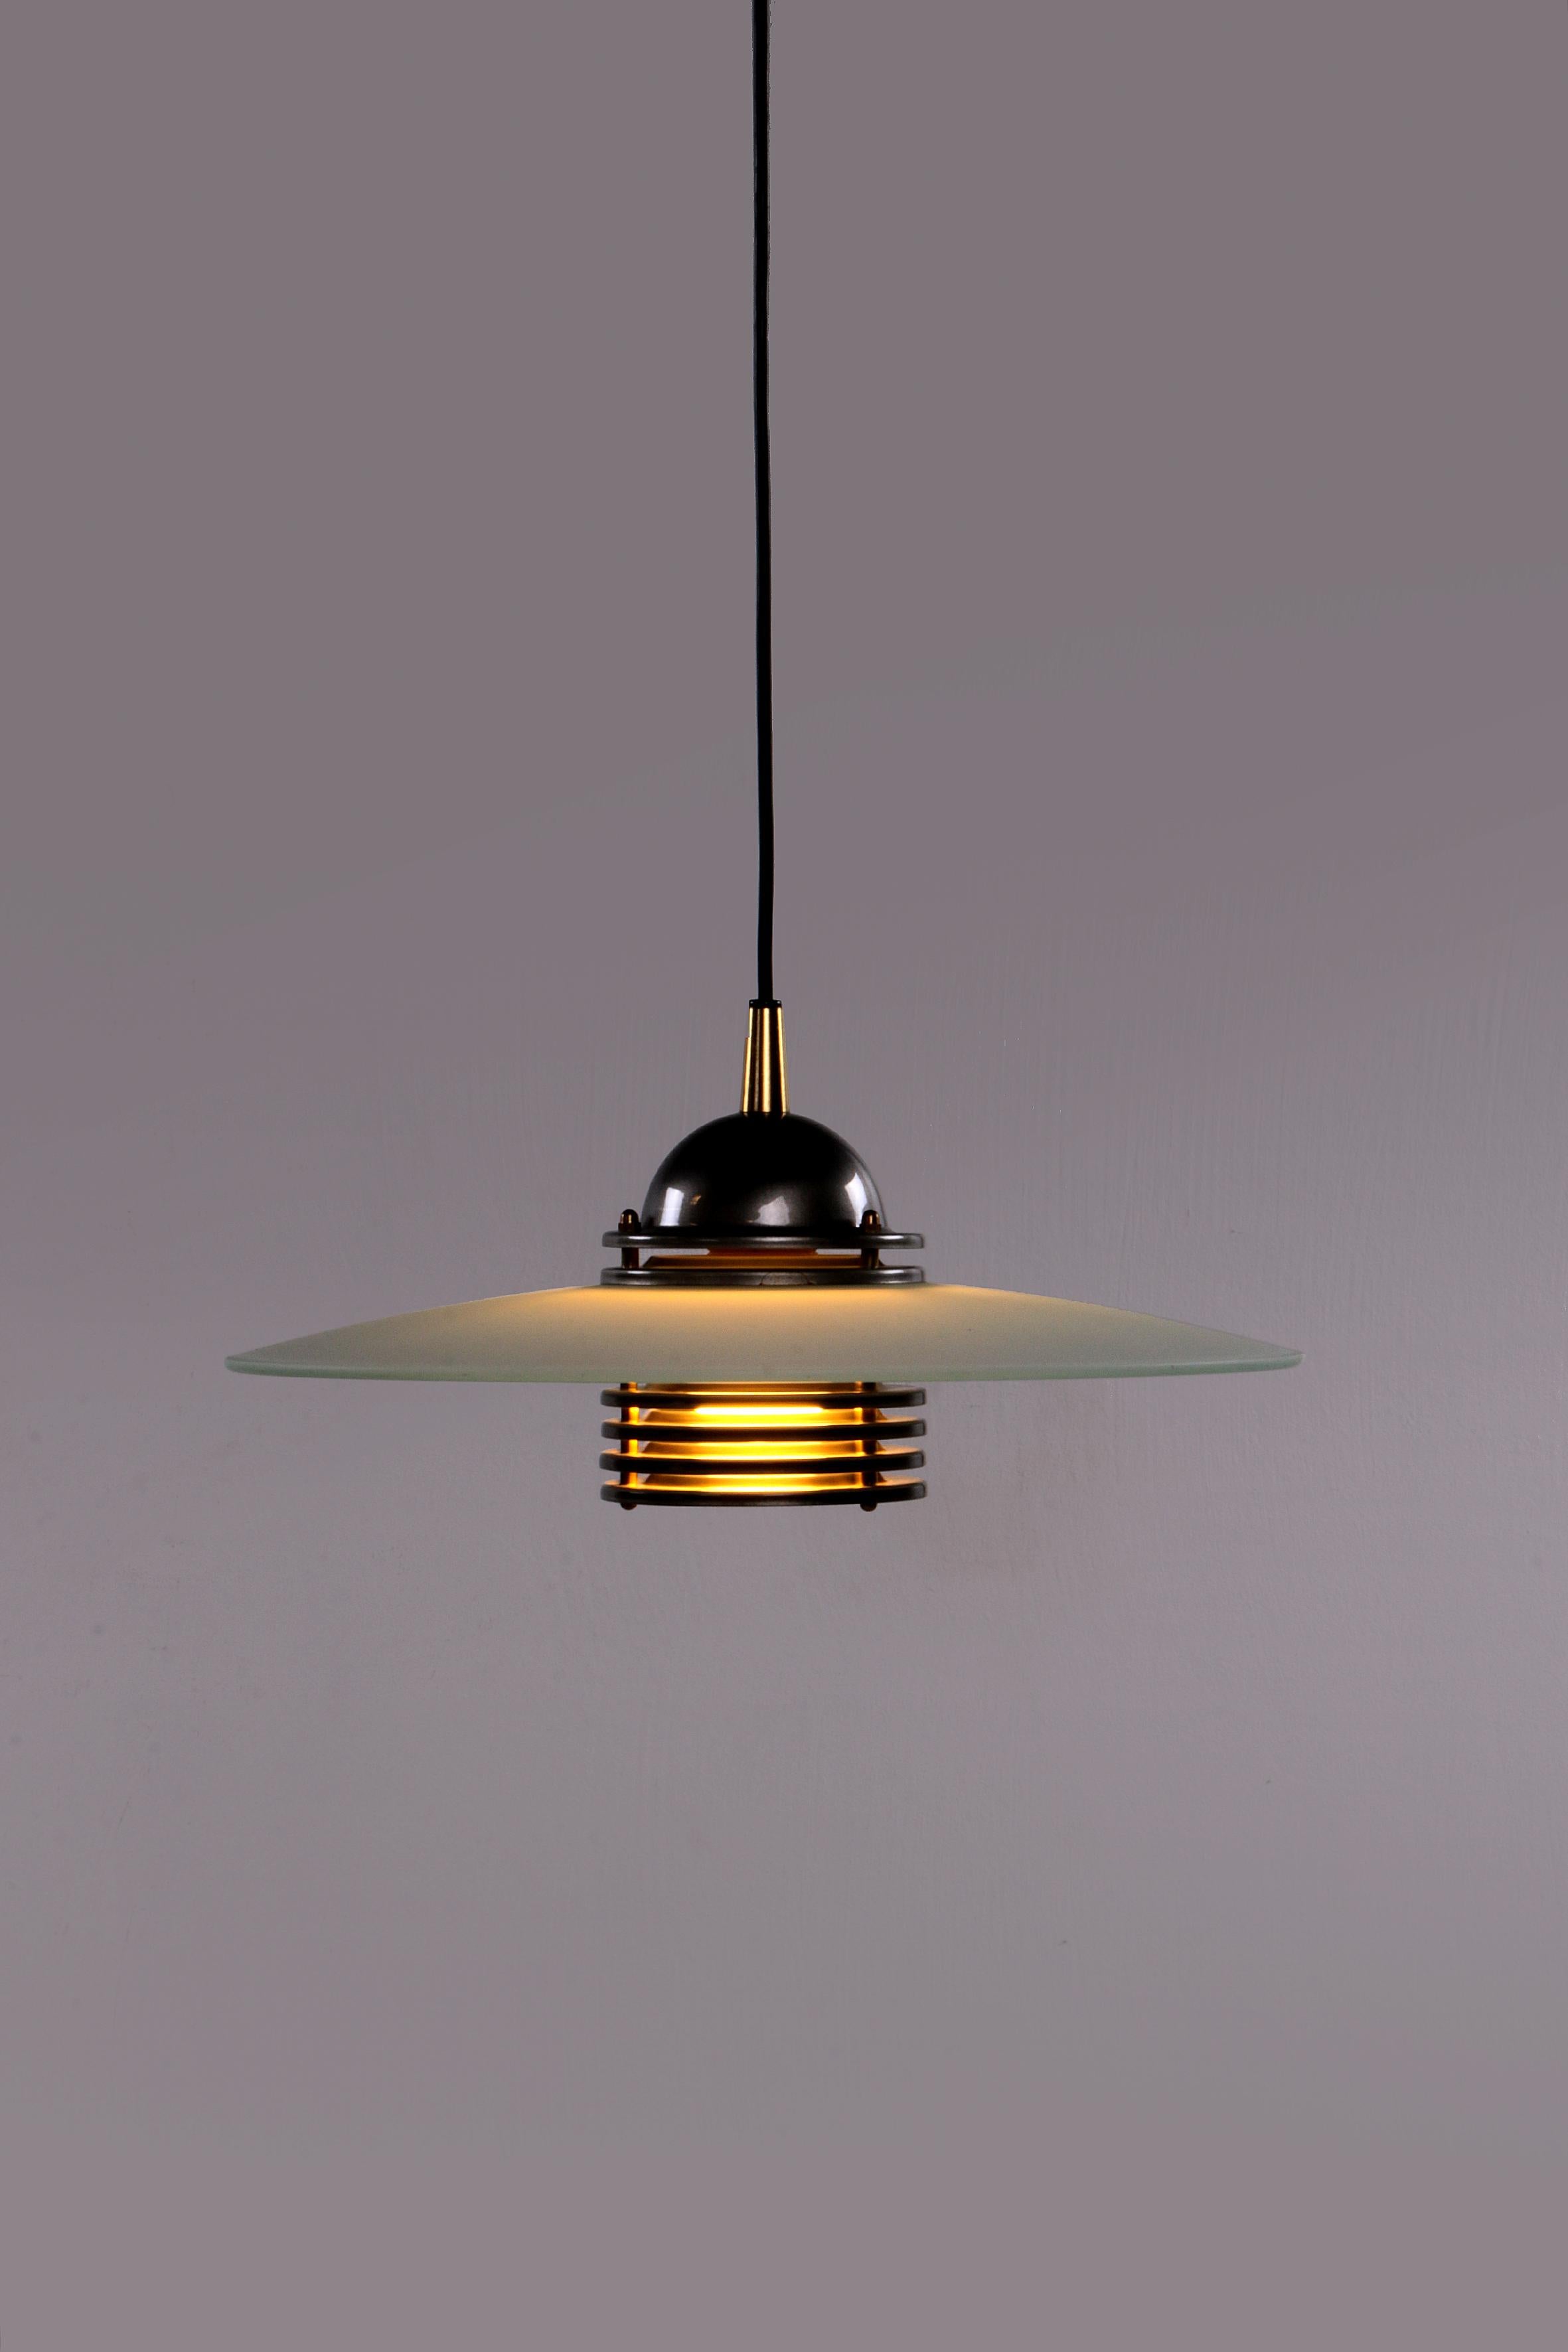 Steel Swedish Design Pendant Lamp by The Brand Belid, 1960 For Sale